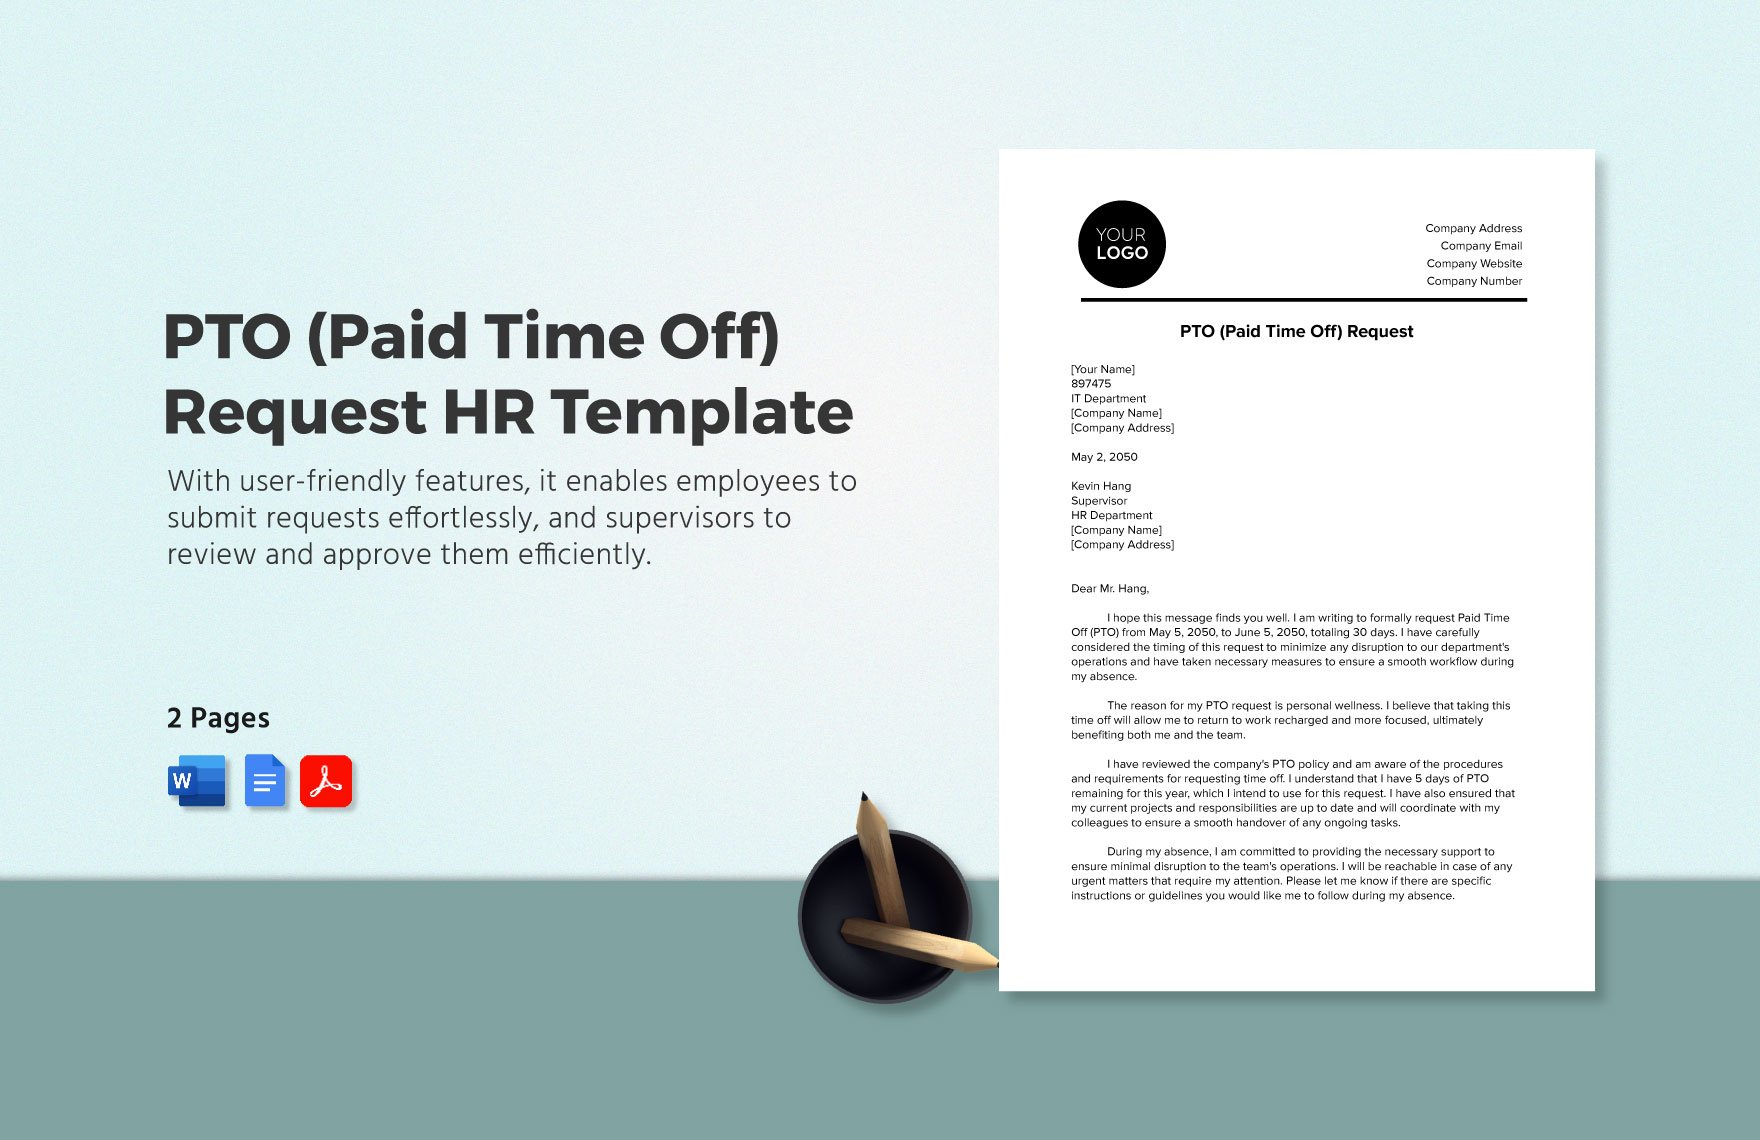 PTO (Paid Time Off) Request HR Template